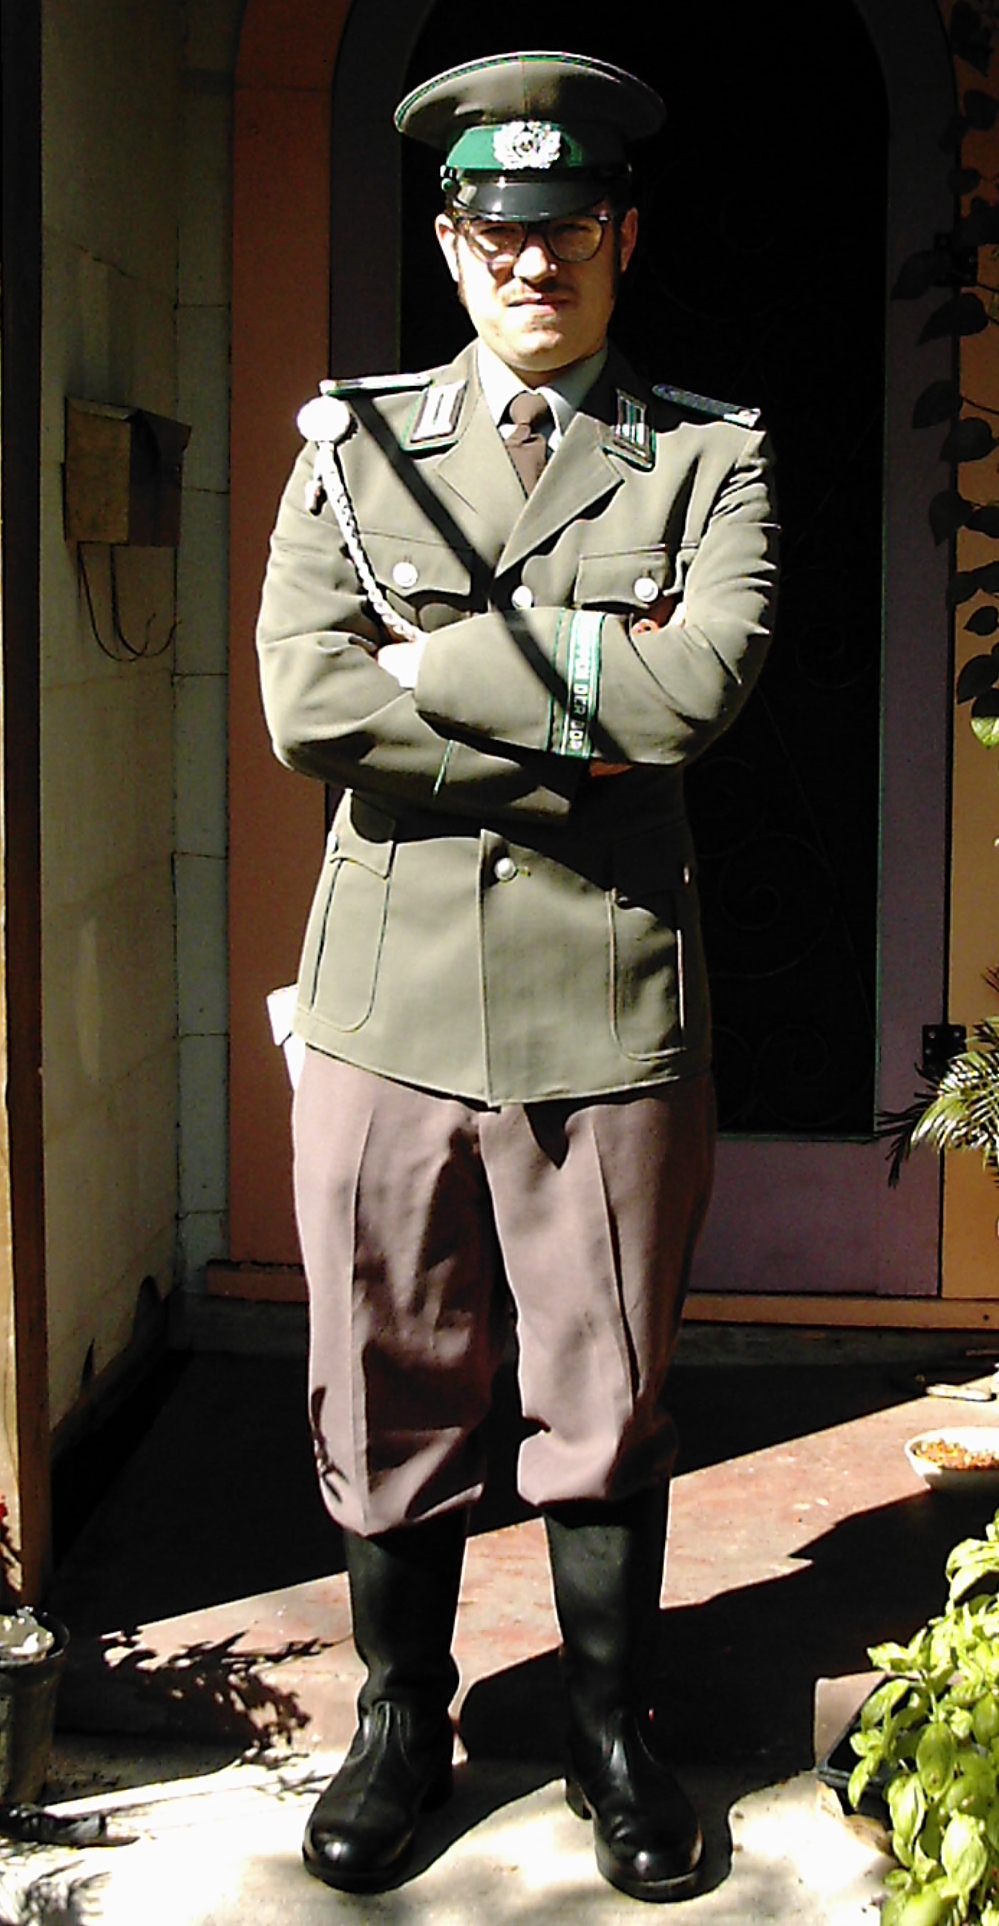 a man wearing an army uniform stands in front of a doorway